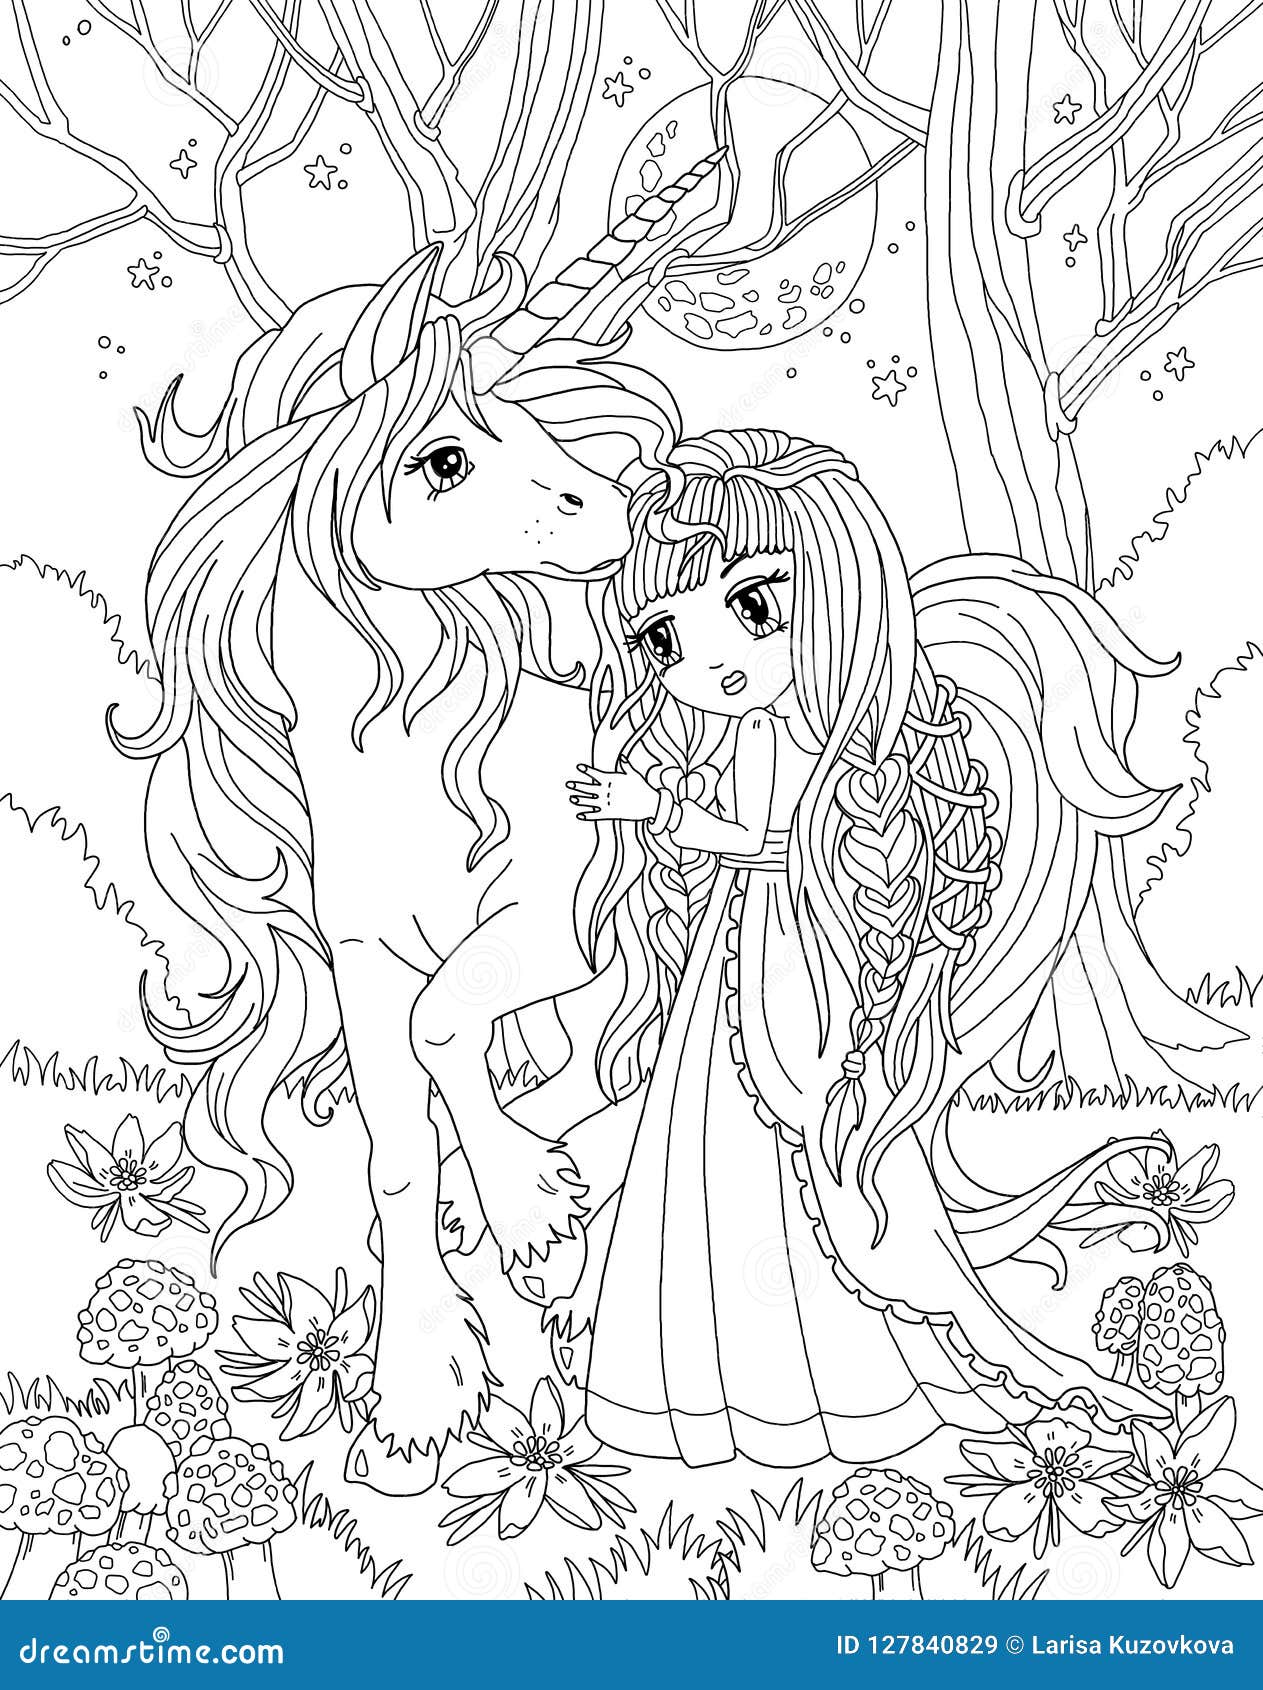 Coloring Page the Unicorn and Princess Stock Illustration ...